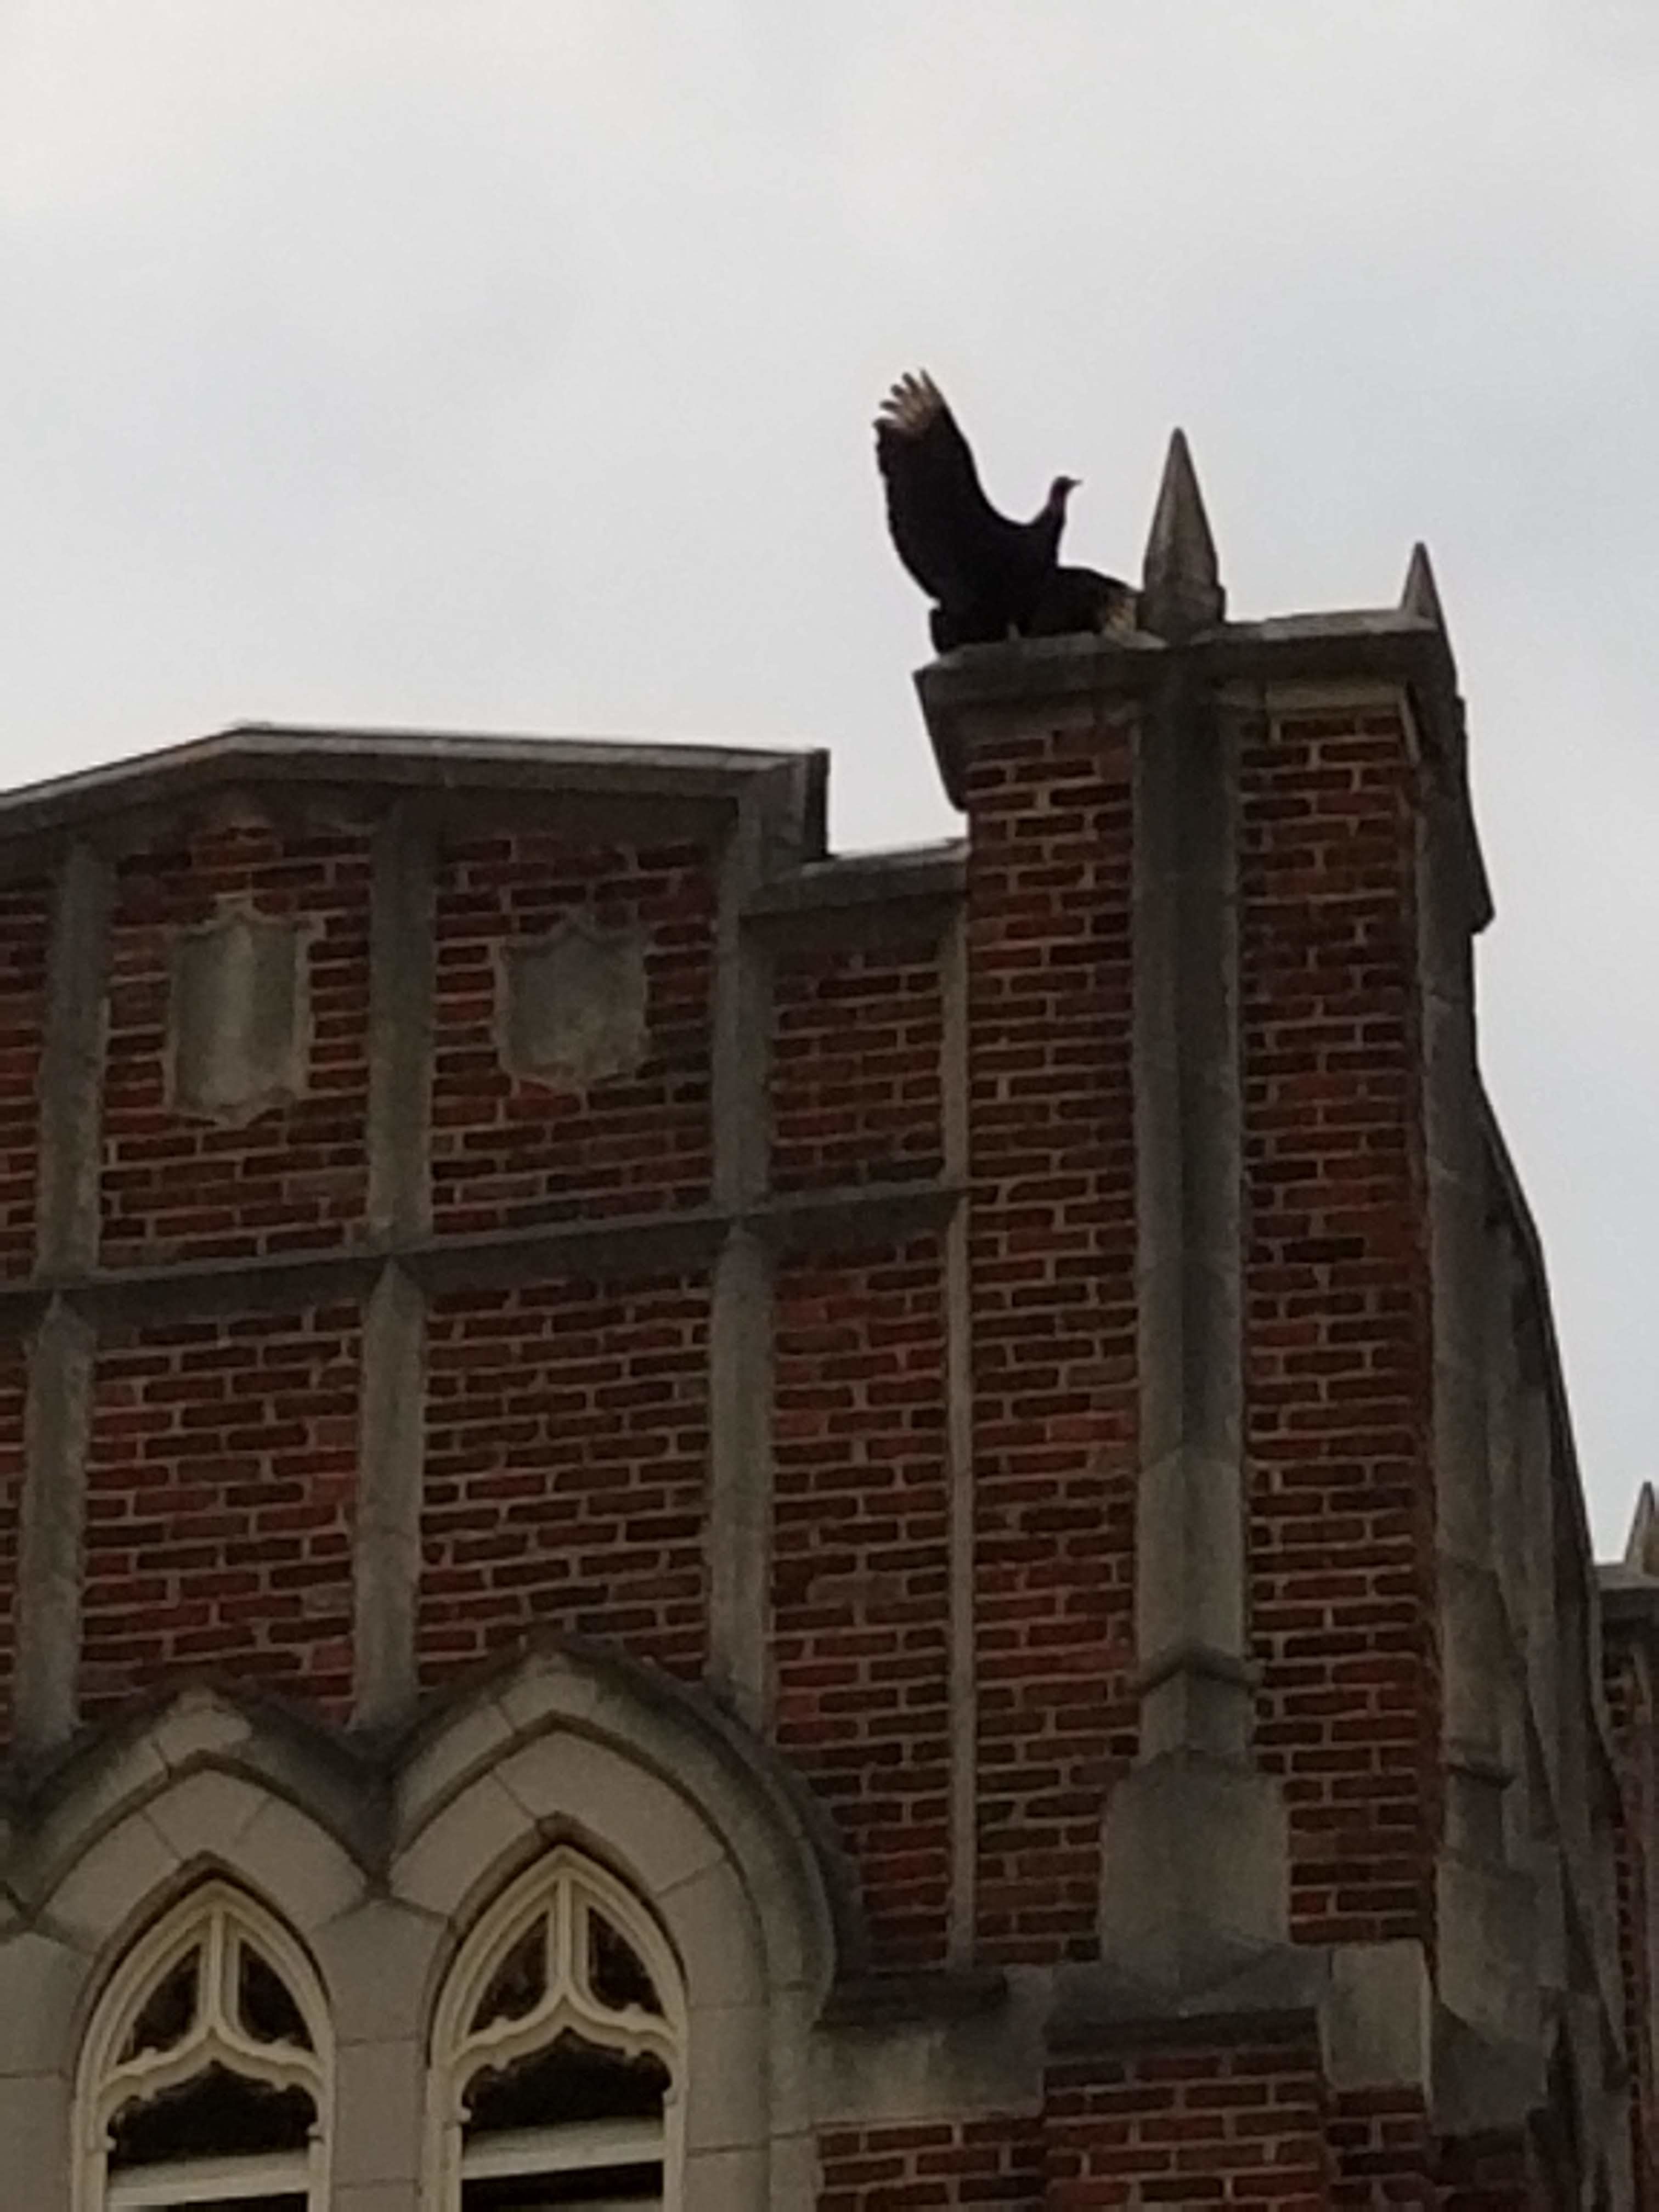 vulture spreads its wings atop the College Place UMC tower